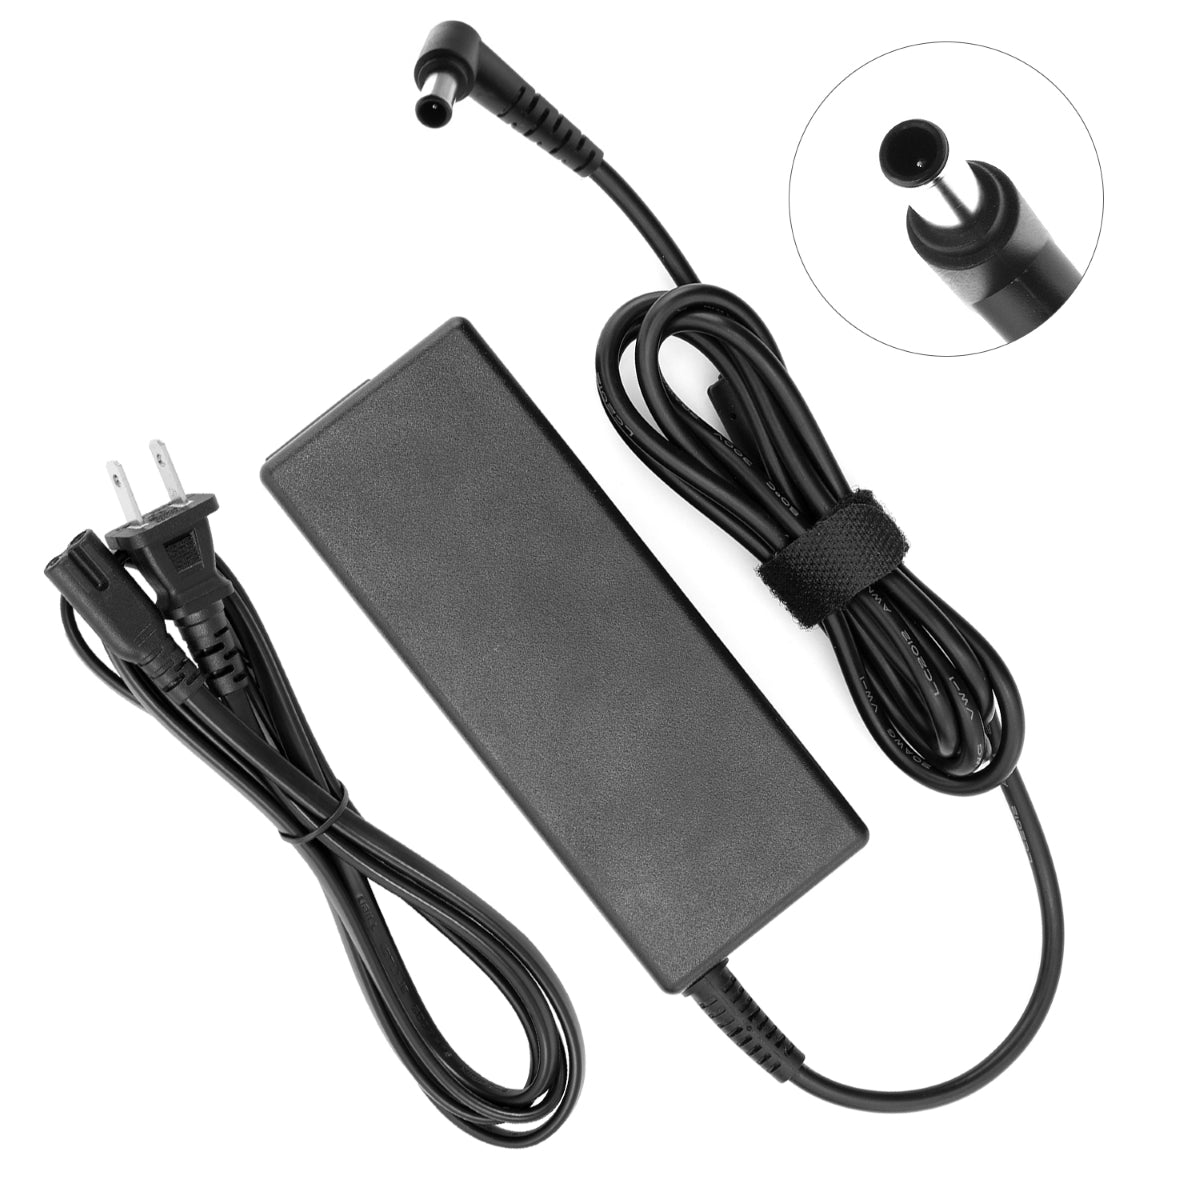 AC Adapter Power Supply for Samsung SyncMaster 770 TFT Monitor